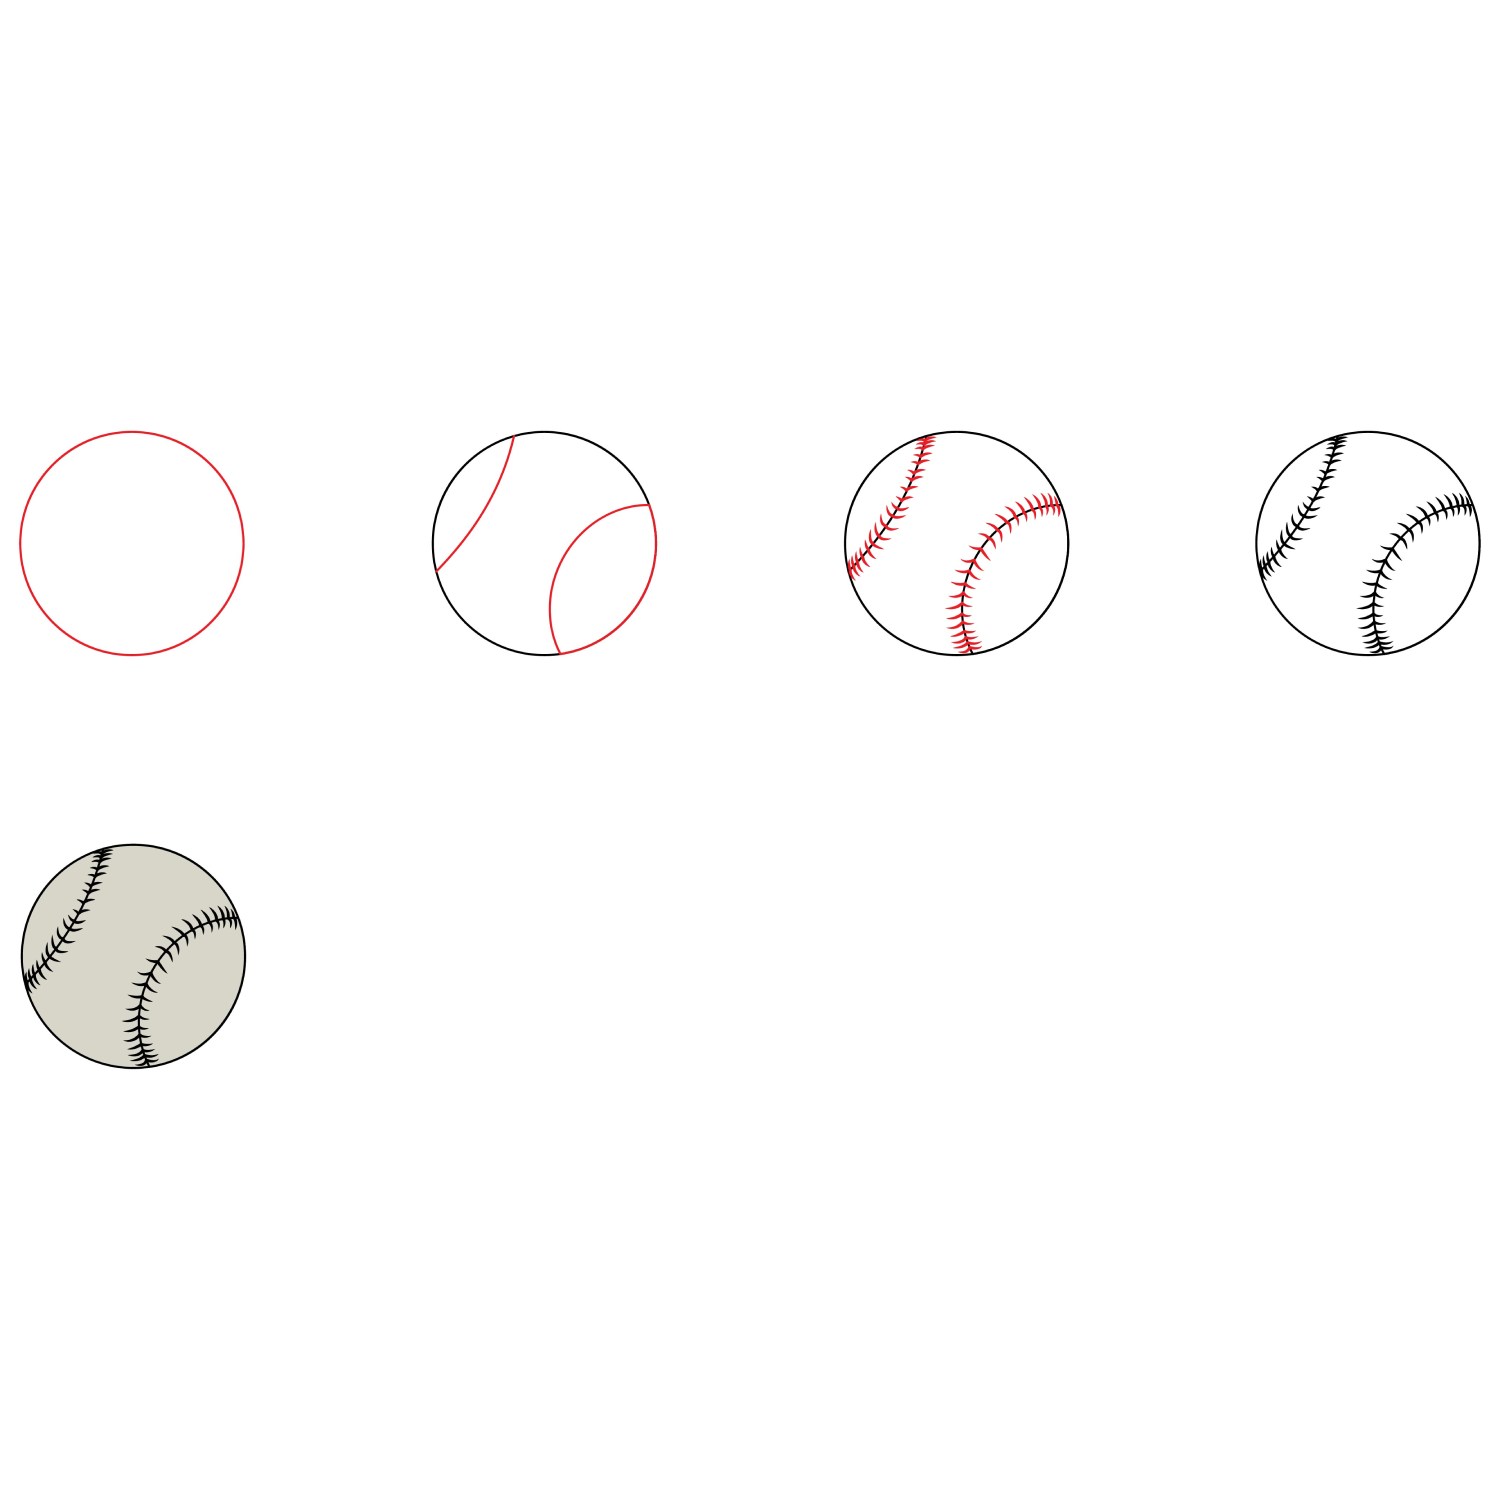 How to Draw a Softball A Fun and Easy Guide